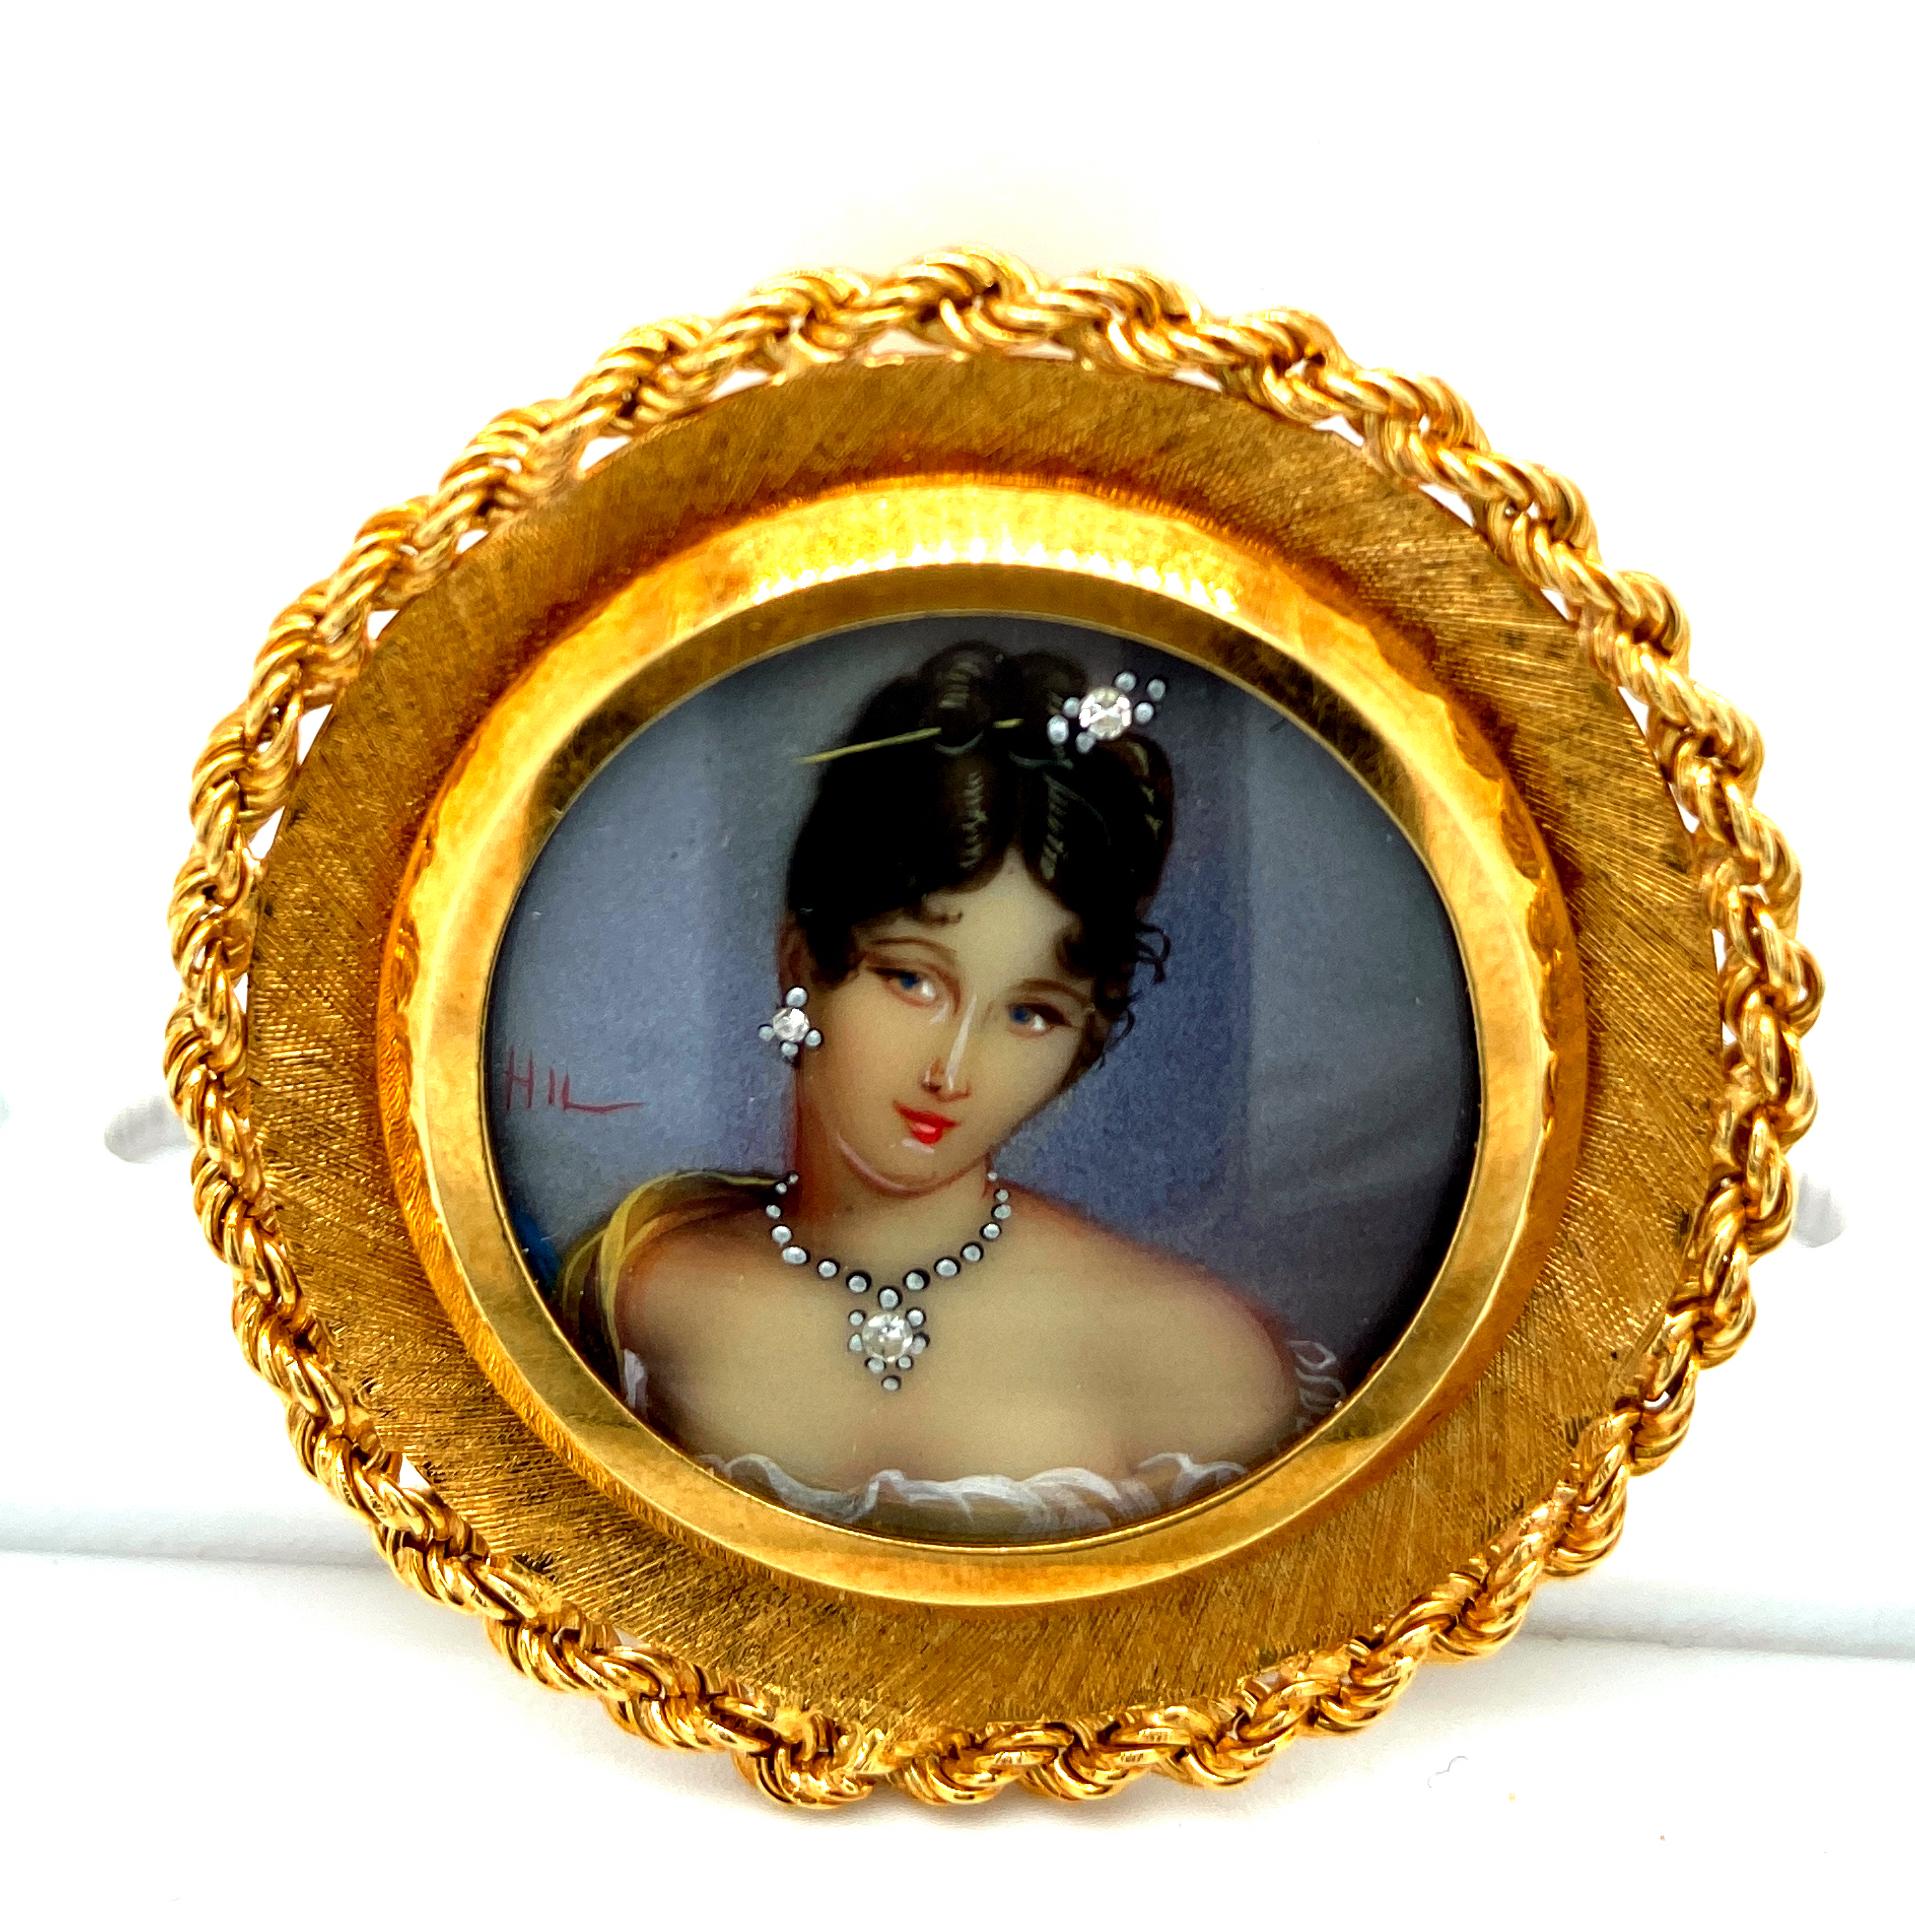 18kt yellow gold elegant hand painted portrait brooch / pendant made in the 1950 s.

This brooch / pendant is a hand painted miniature portrait, depicting a young lady in period dress wearing a diamond necklace, diamond earring and diamond